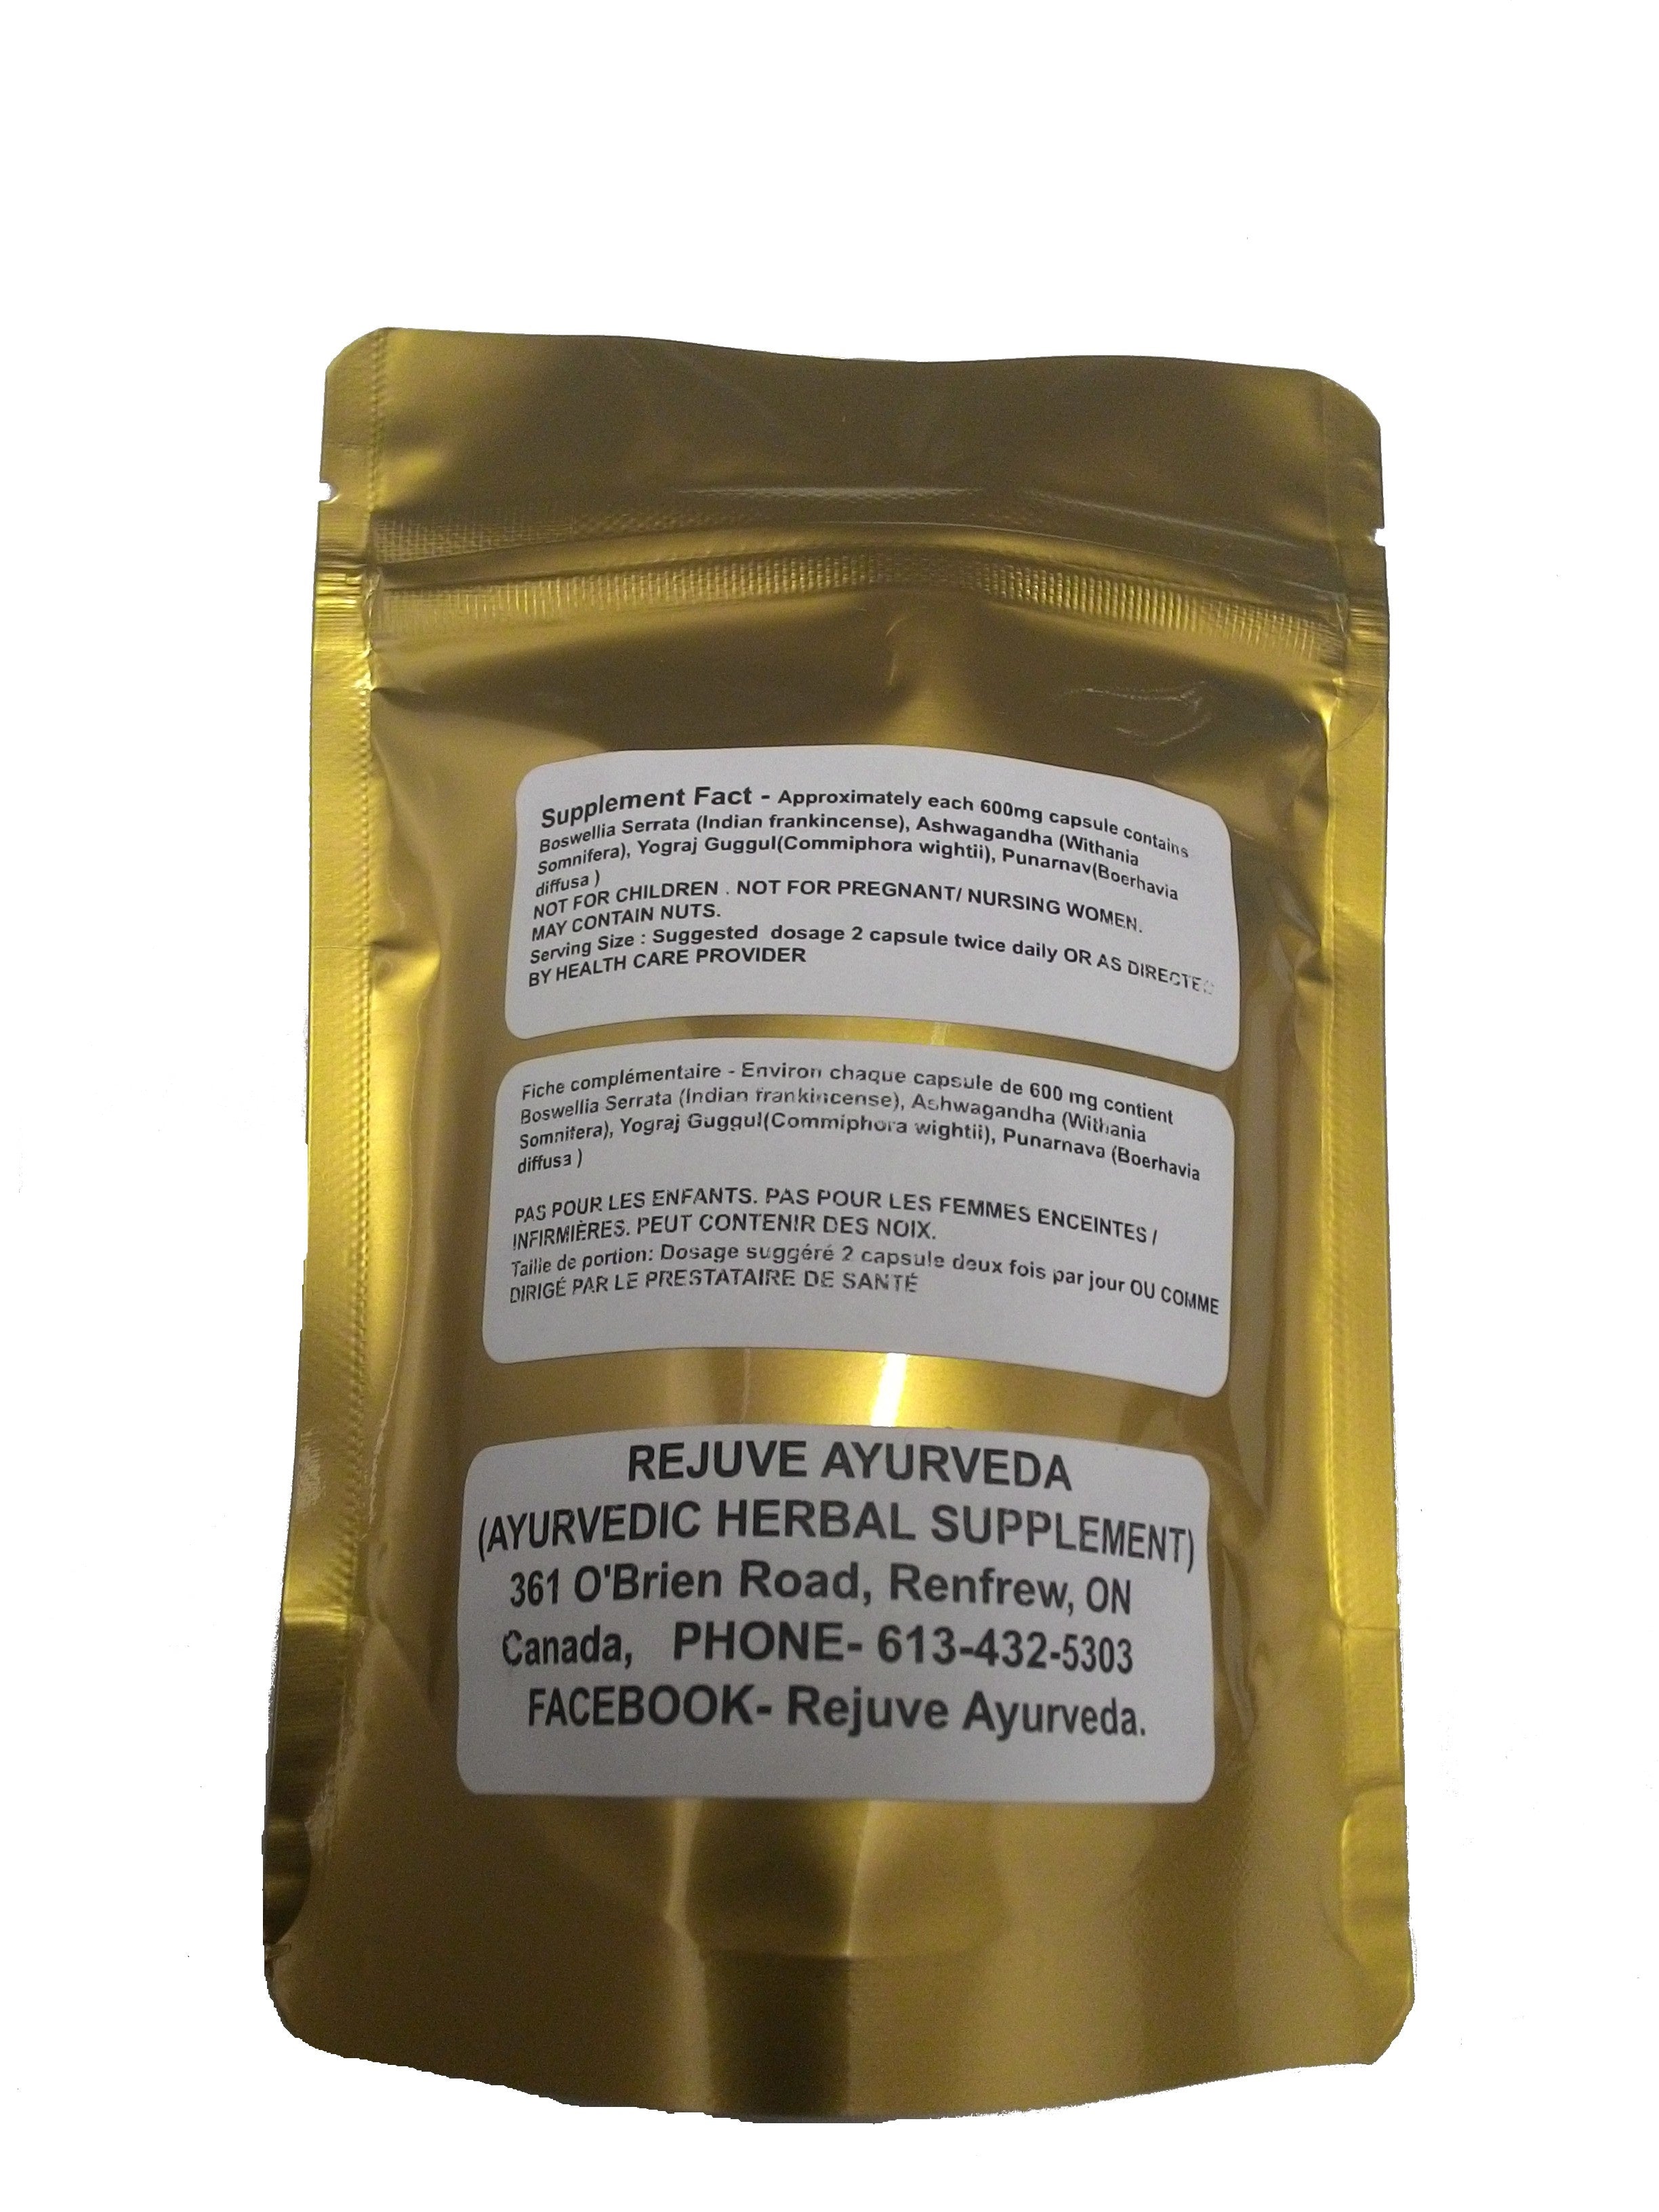 this is the back image of "PAIN RELIEF" with herbal combination names 